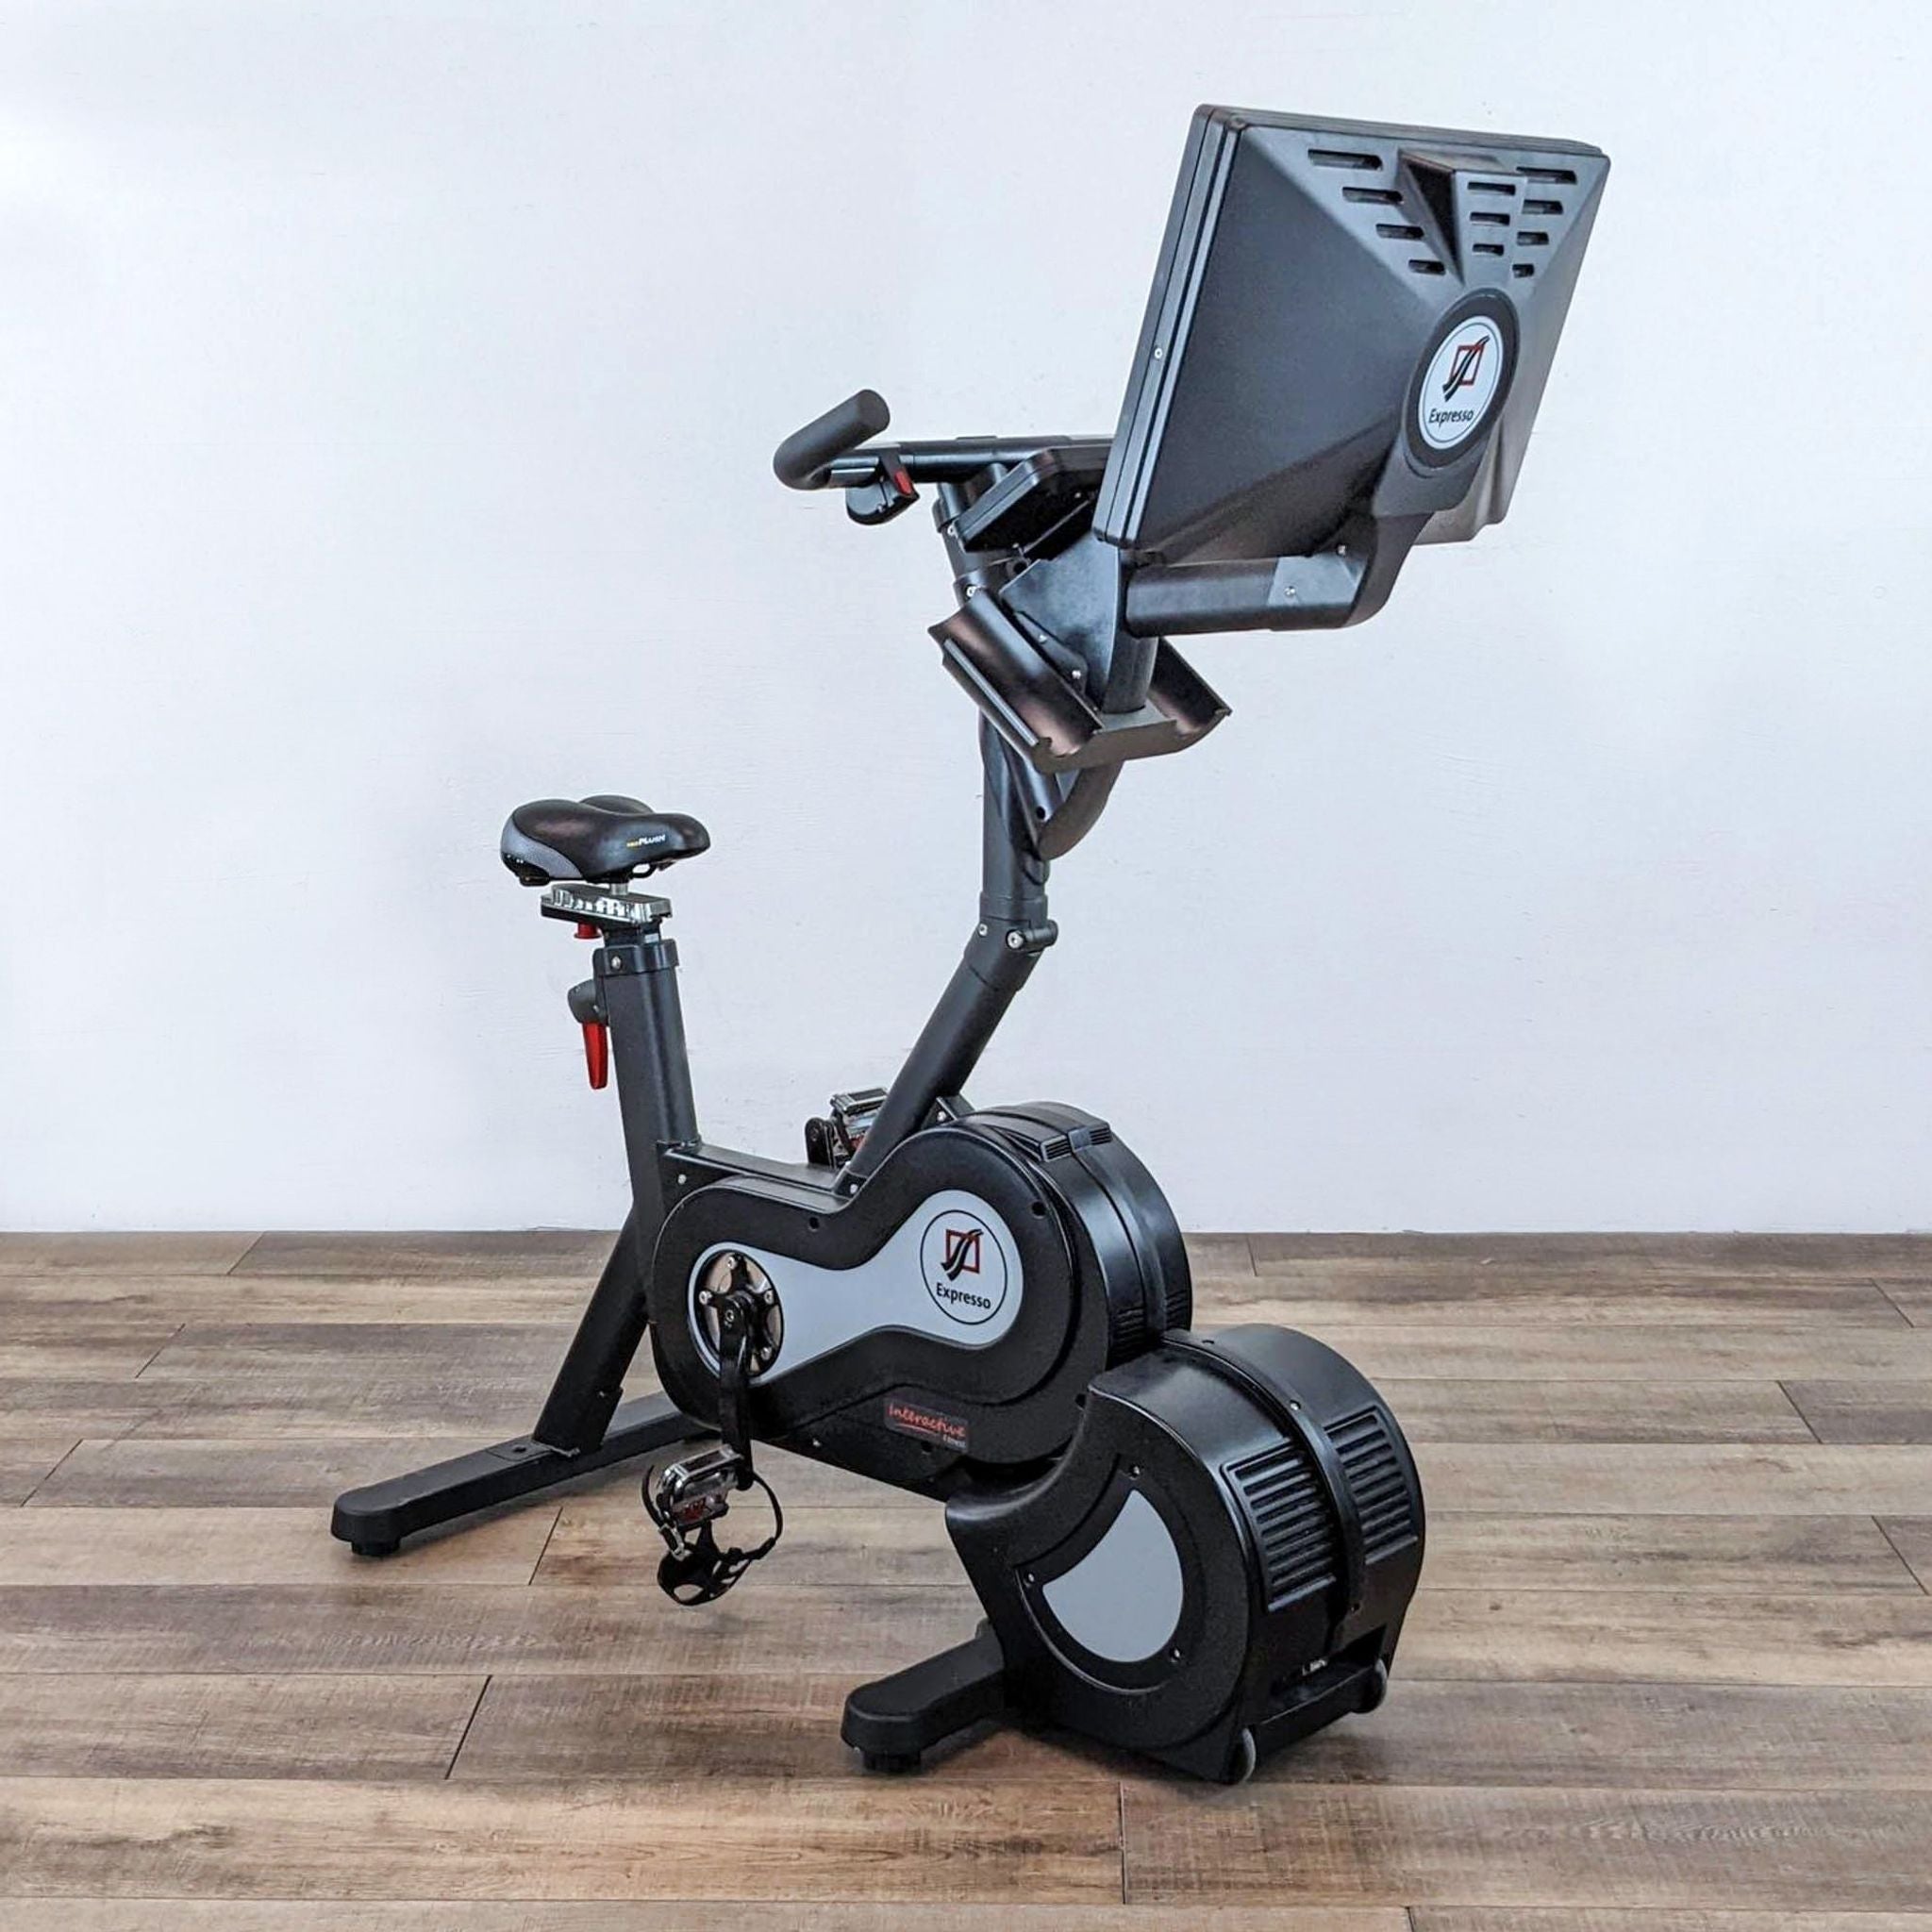 Expresso brand stationary bike with a large screen and black frame on a wooden floor.